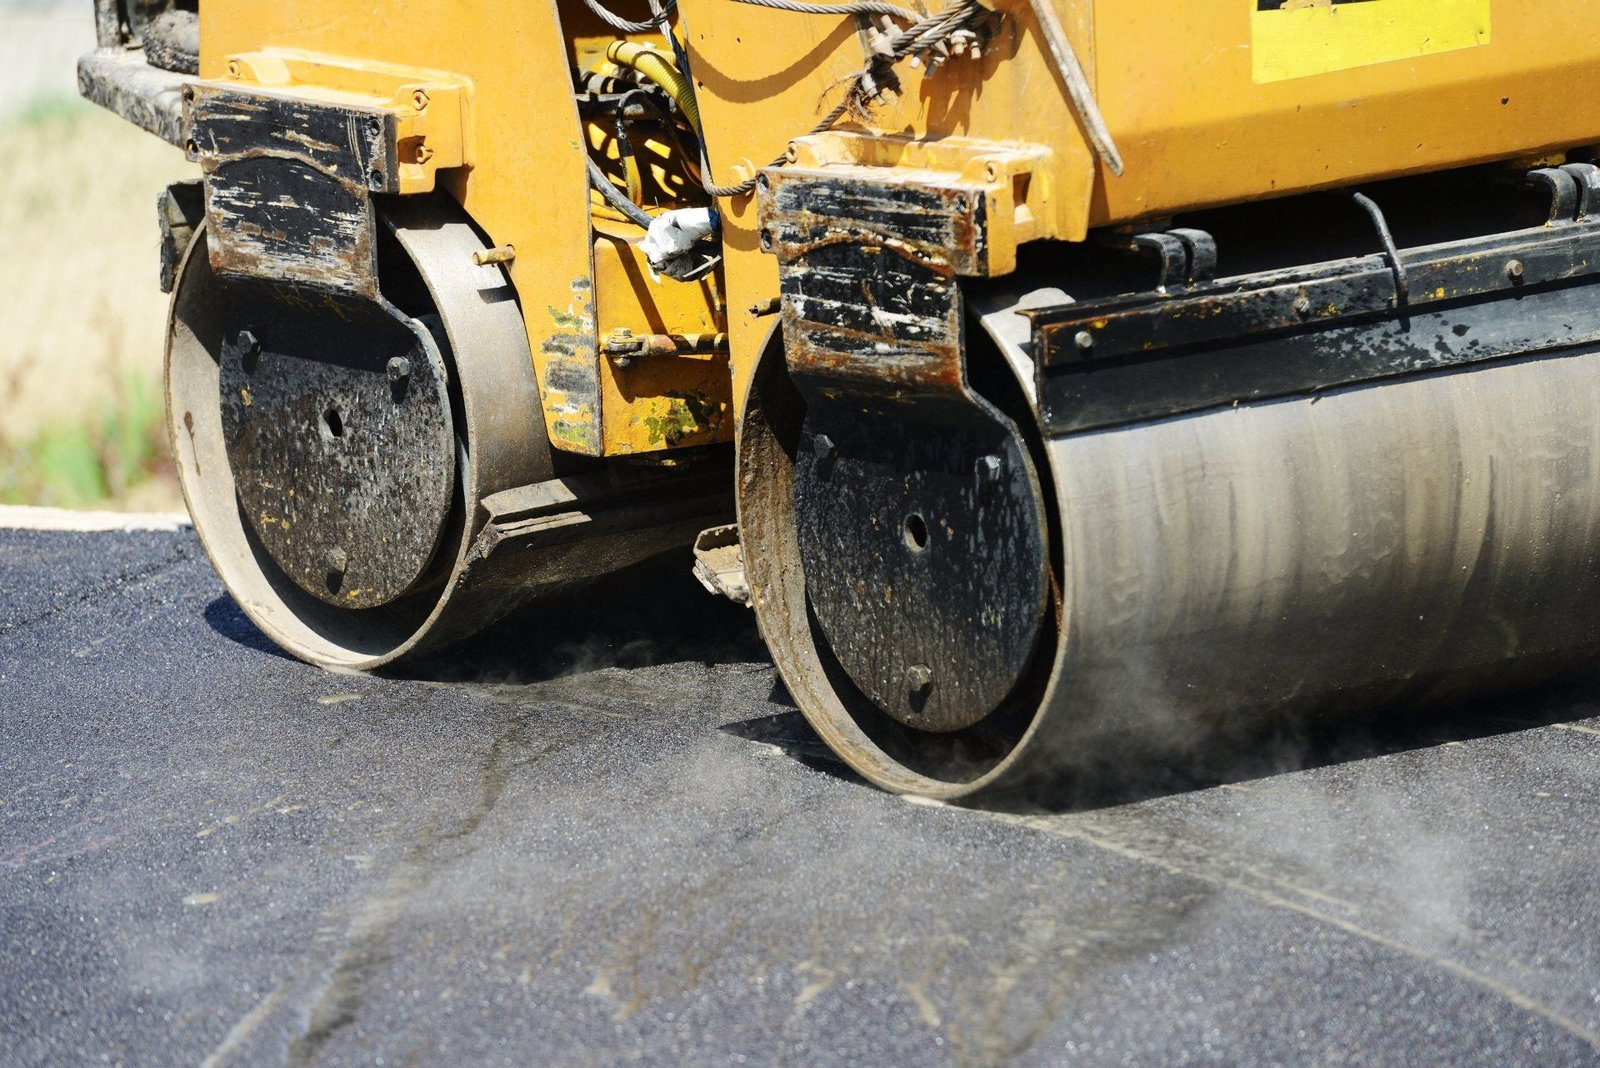 After patching potholes, this asphalt compactor is used to compress the asphalt surface.